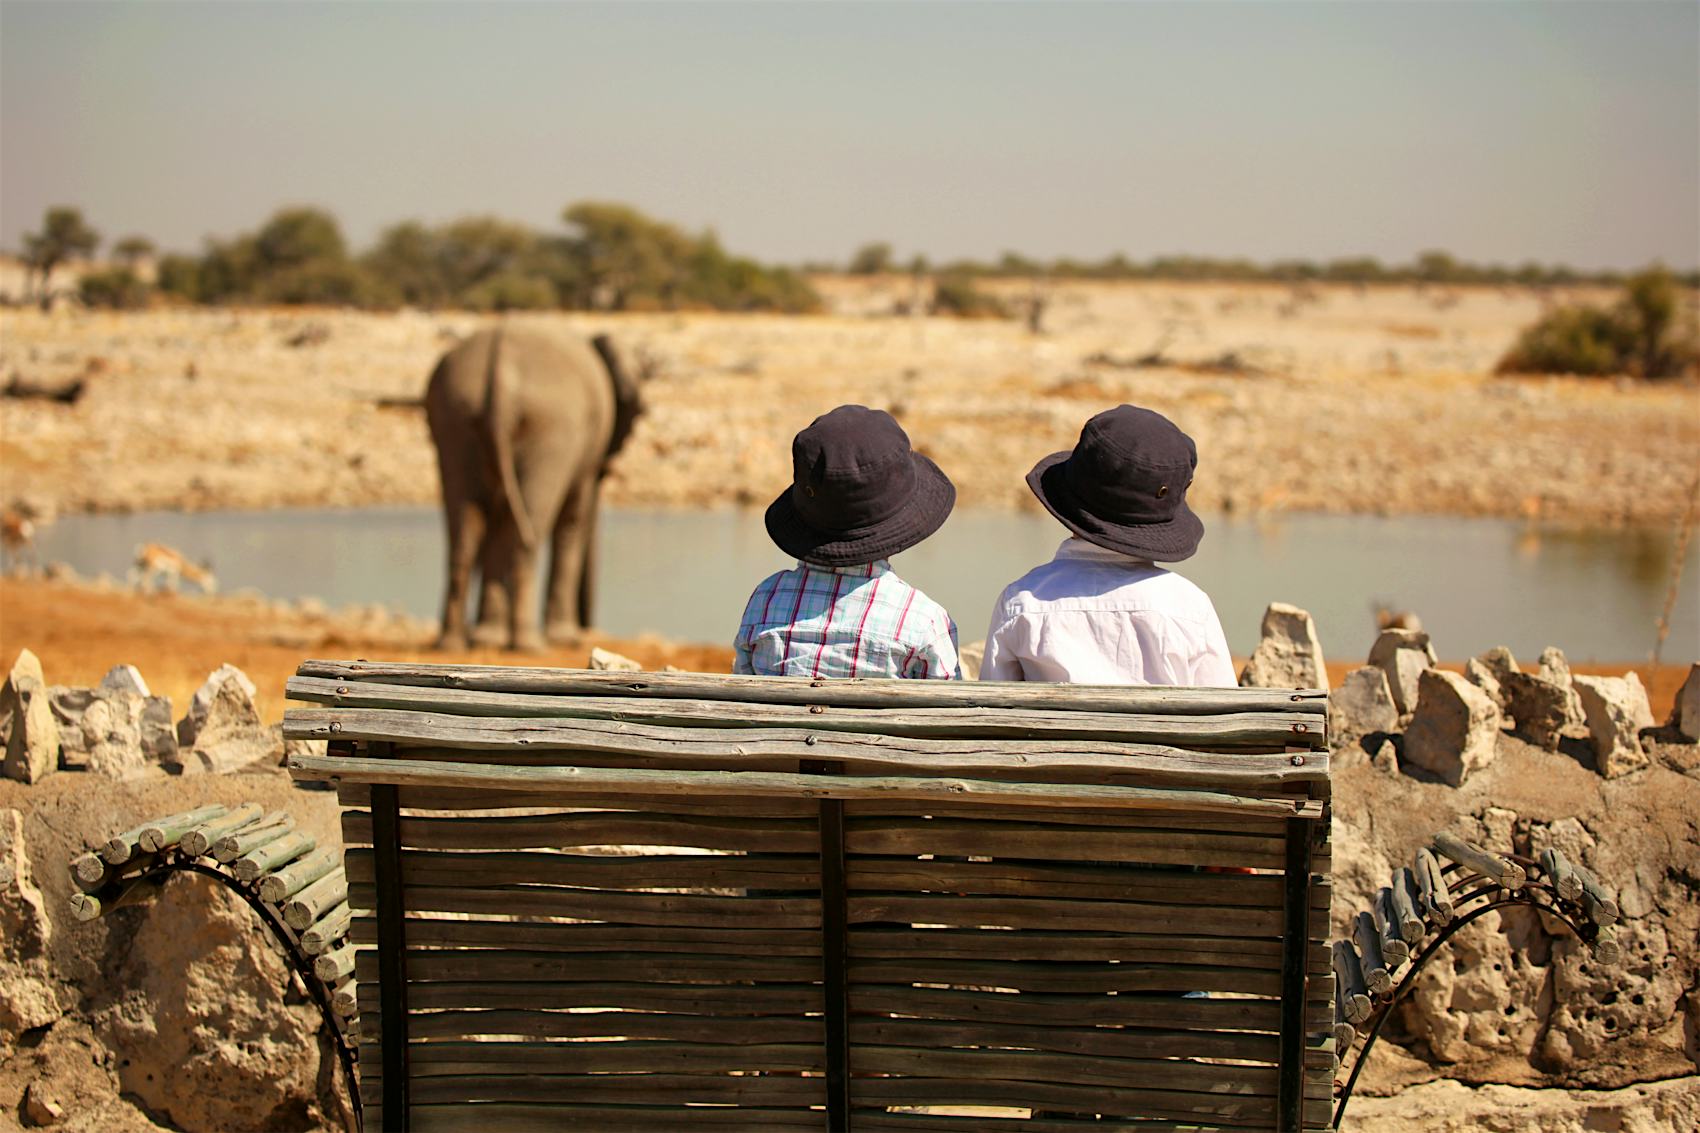 Two children are watching an elephant at the Okaukuejo waterhole in Etosha National Park in Namibia